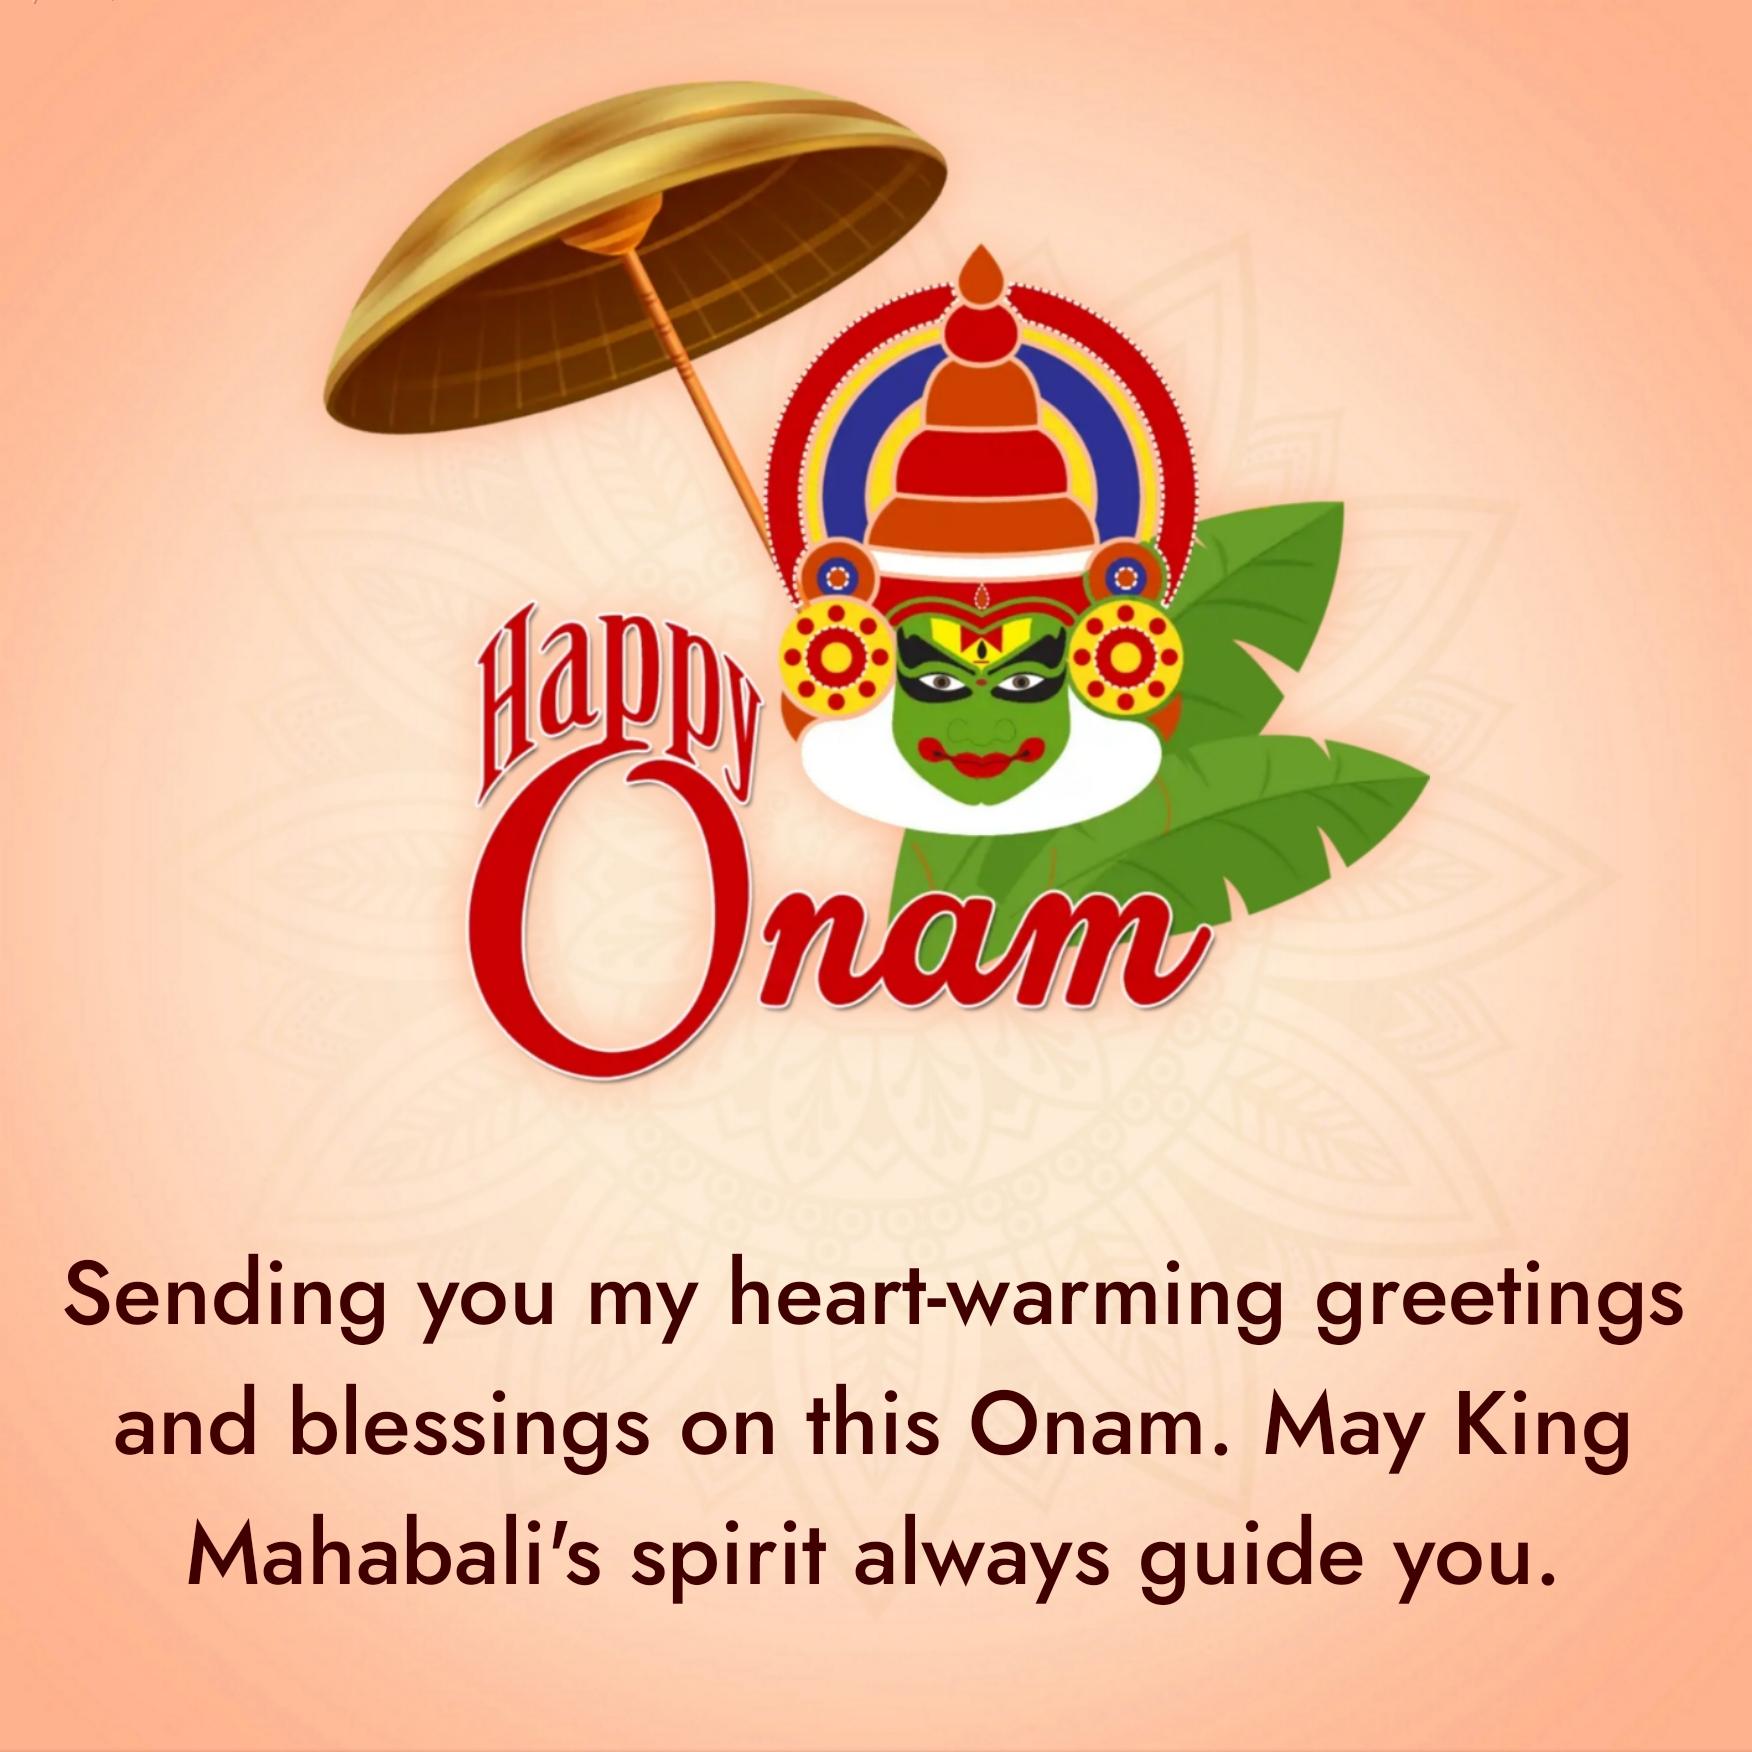 Sending you my heart-warming greetings and blessings